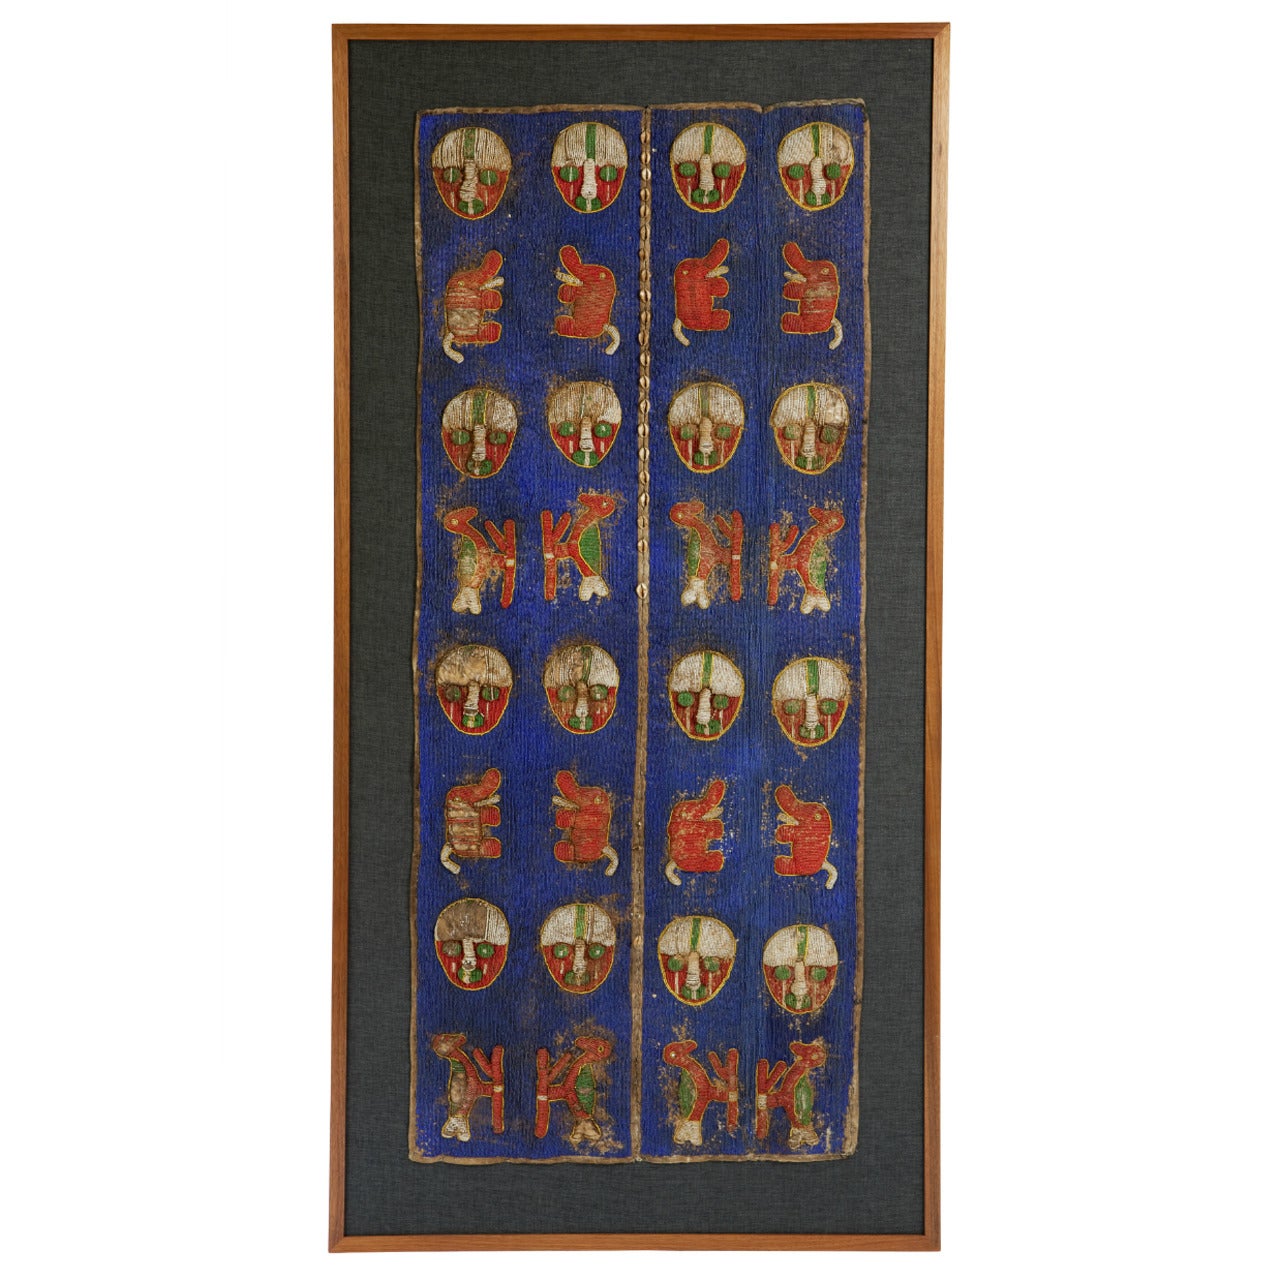 Early 20th Century Hand-Woven Beaded Panel by the Yoruba People For Sale